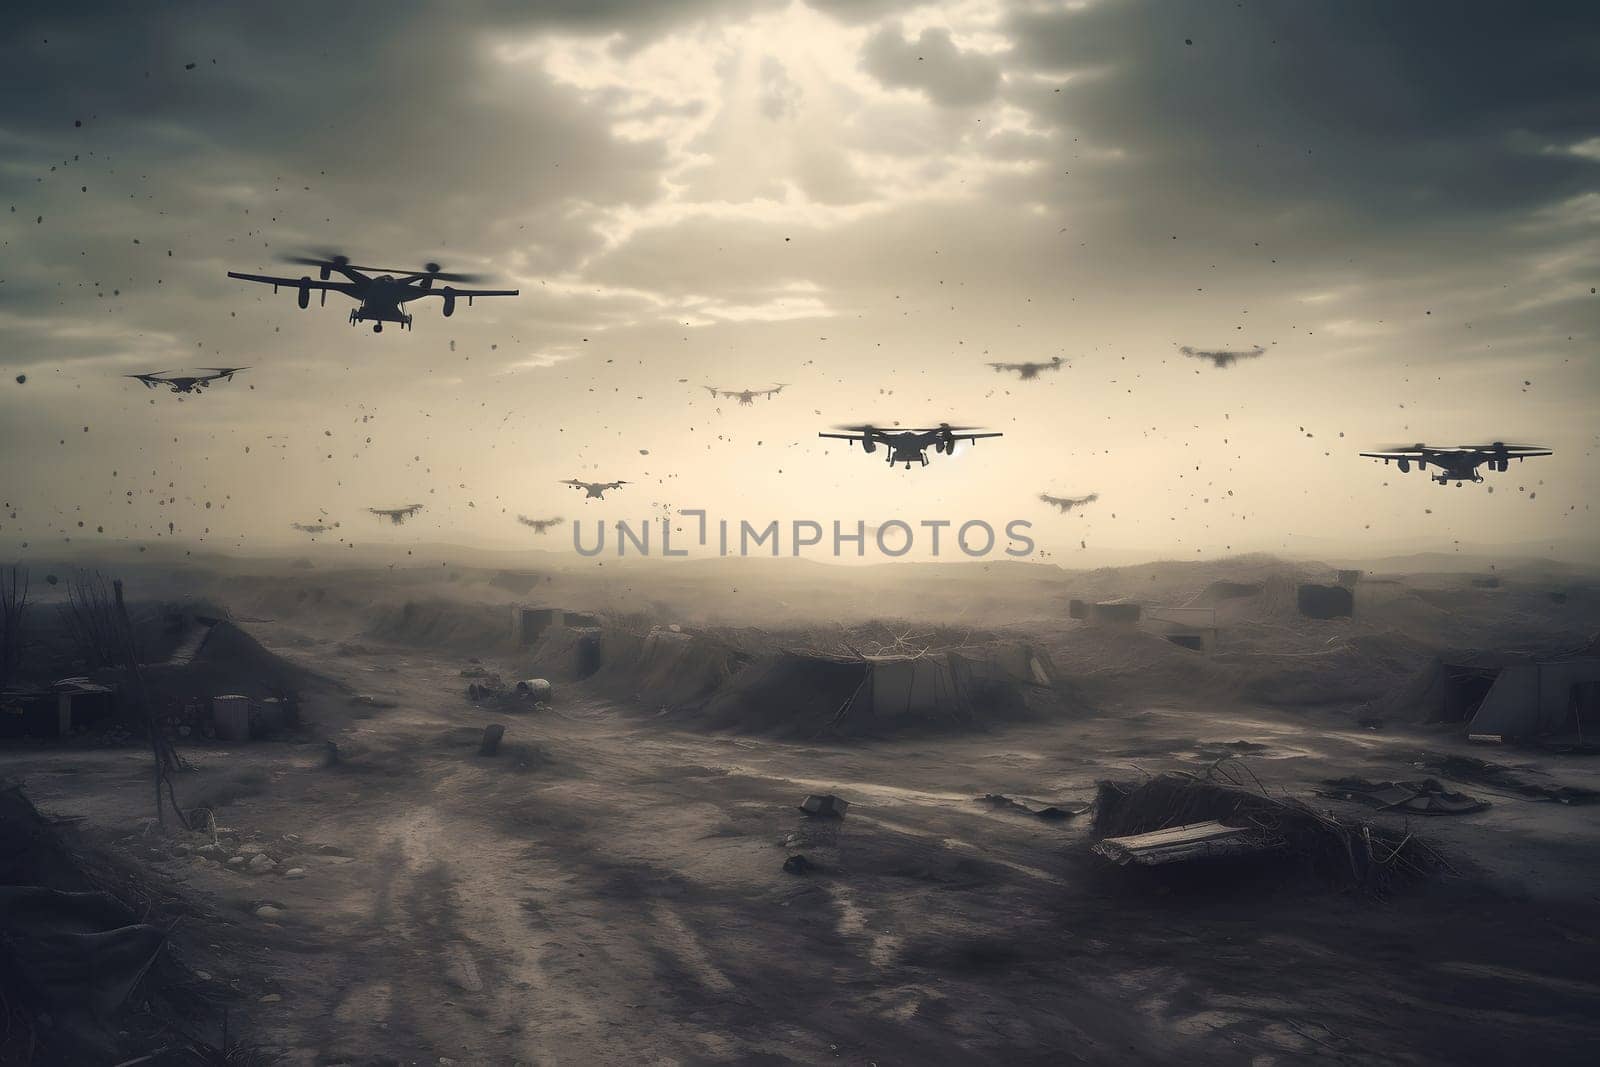 drone war - many military copter drones above middle-eastern city battlefield at daytime, neural network generated image by z1b